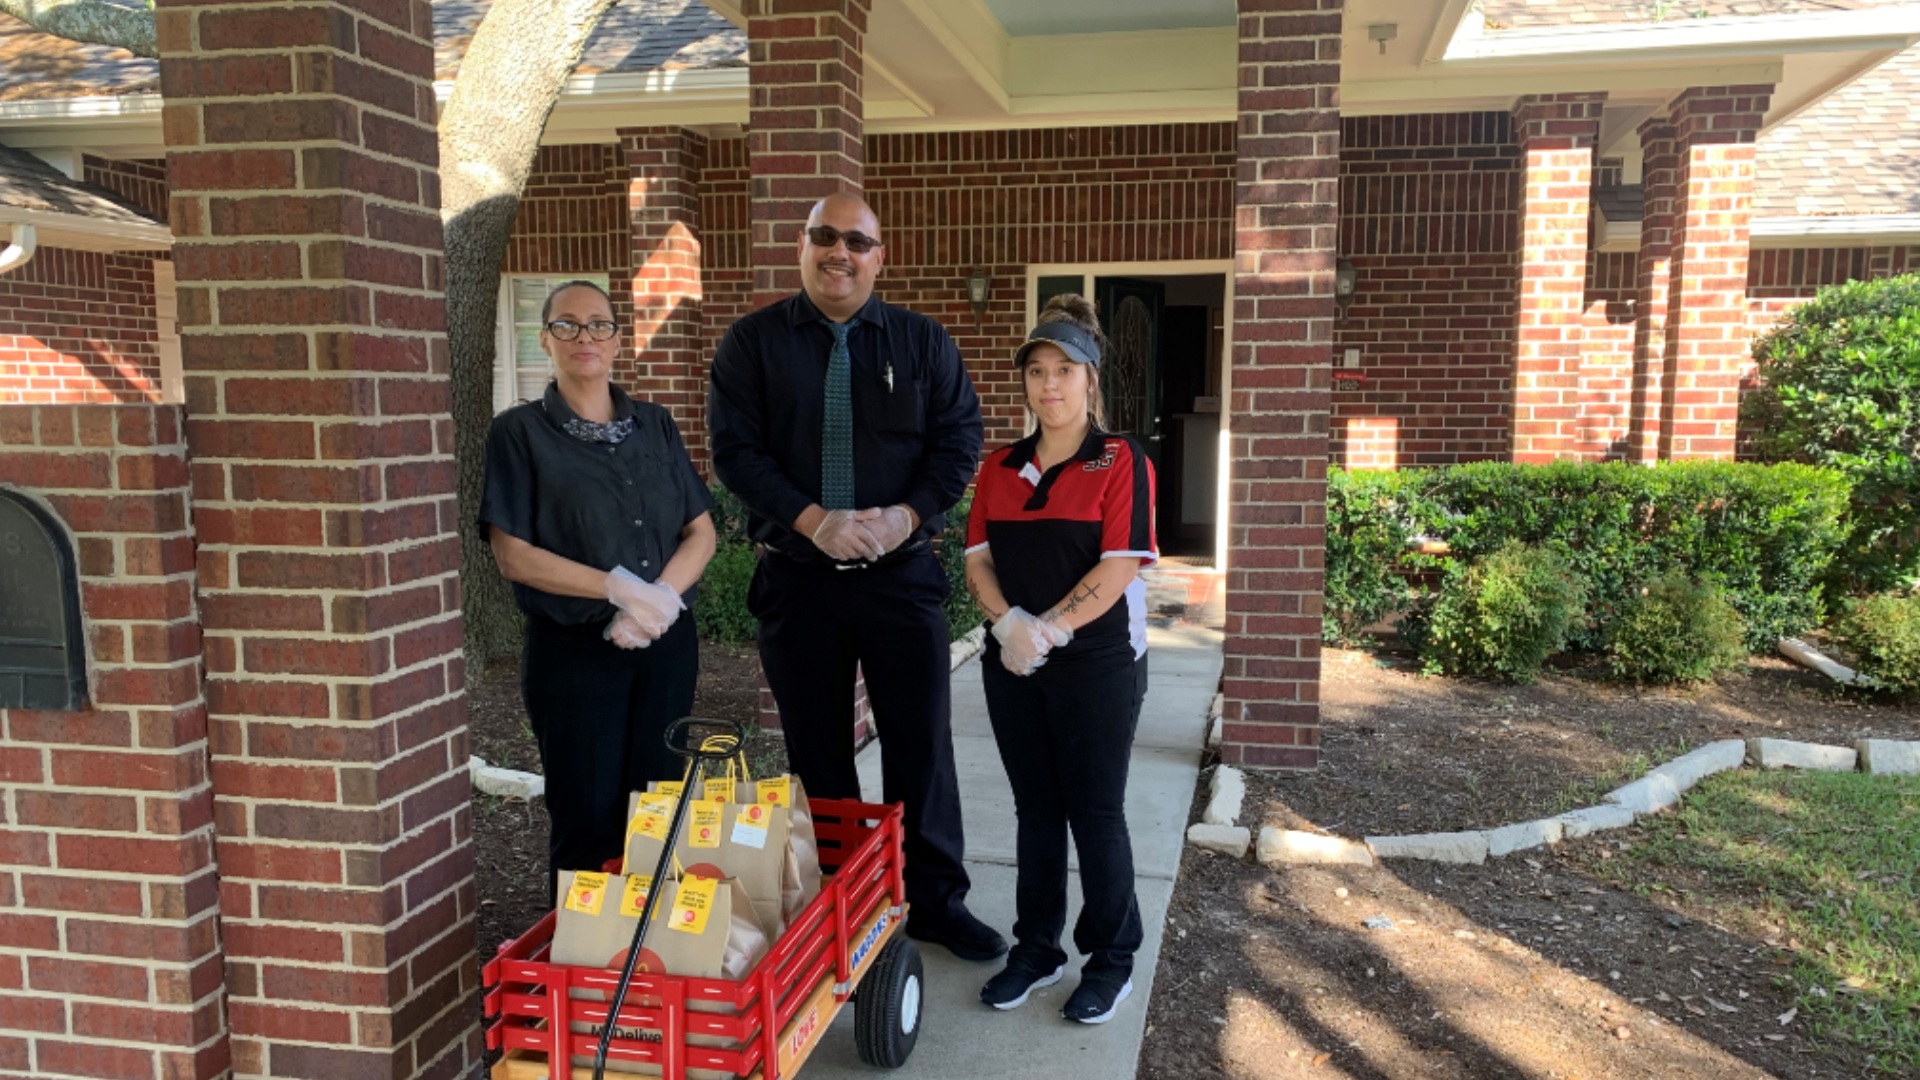 A local McDonald's delivered food to the Temple Ronald McDonald House.